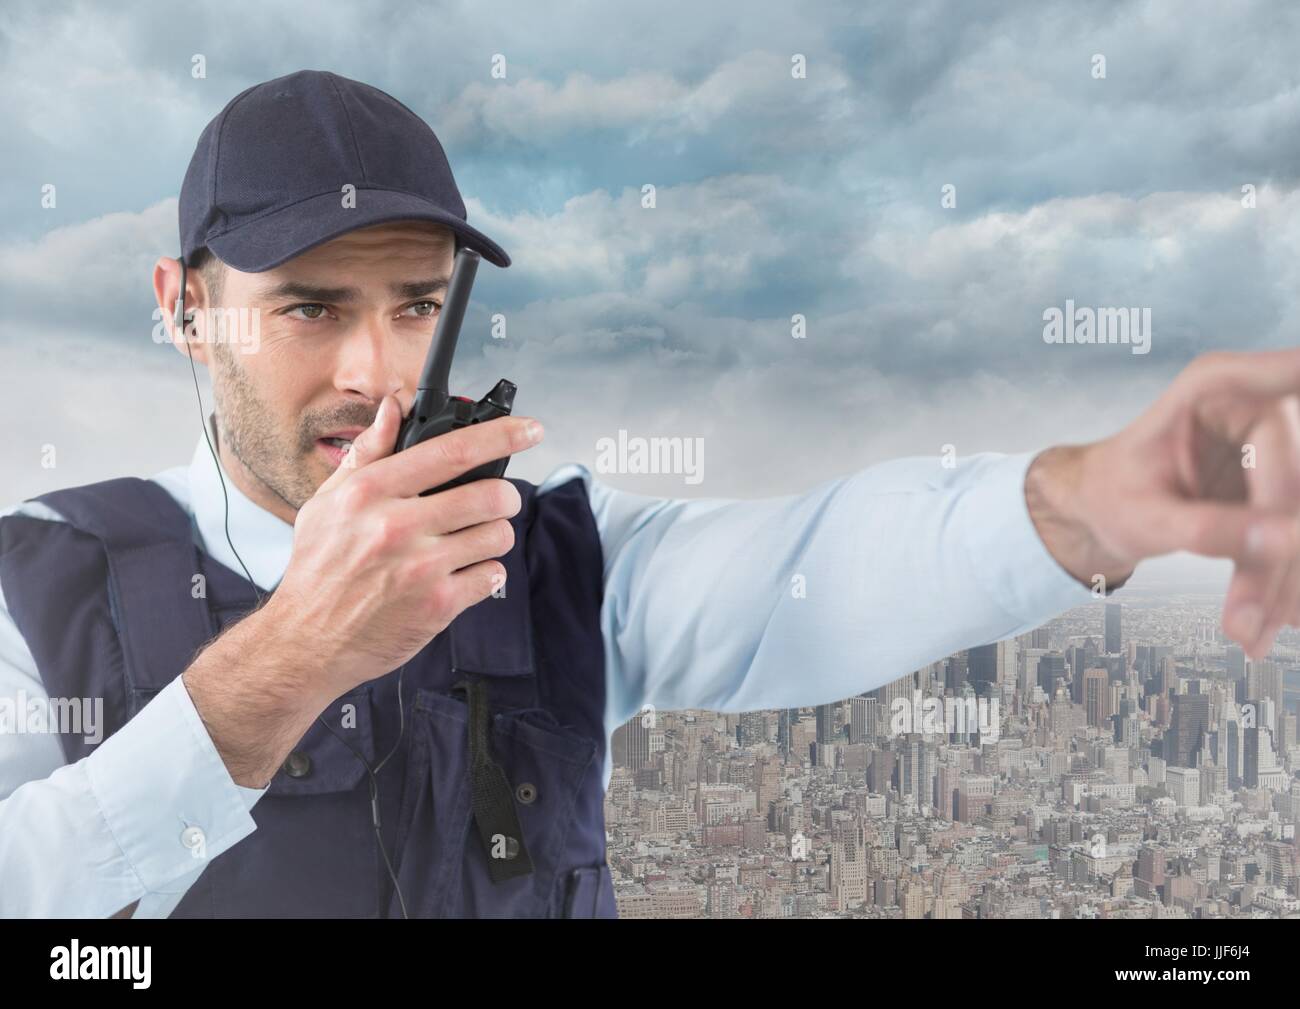 Digital composite of Security guard with walkie talkie pointing against skyline and clouds Stock Photo